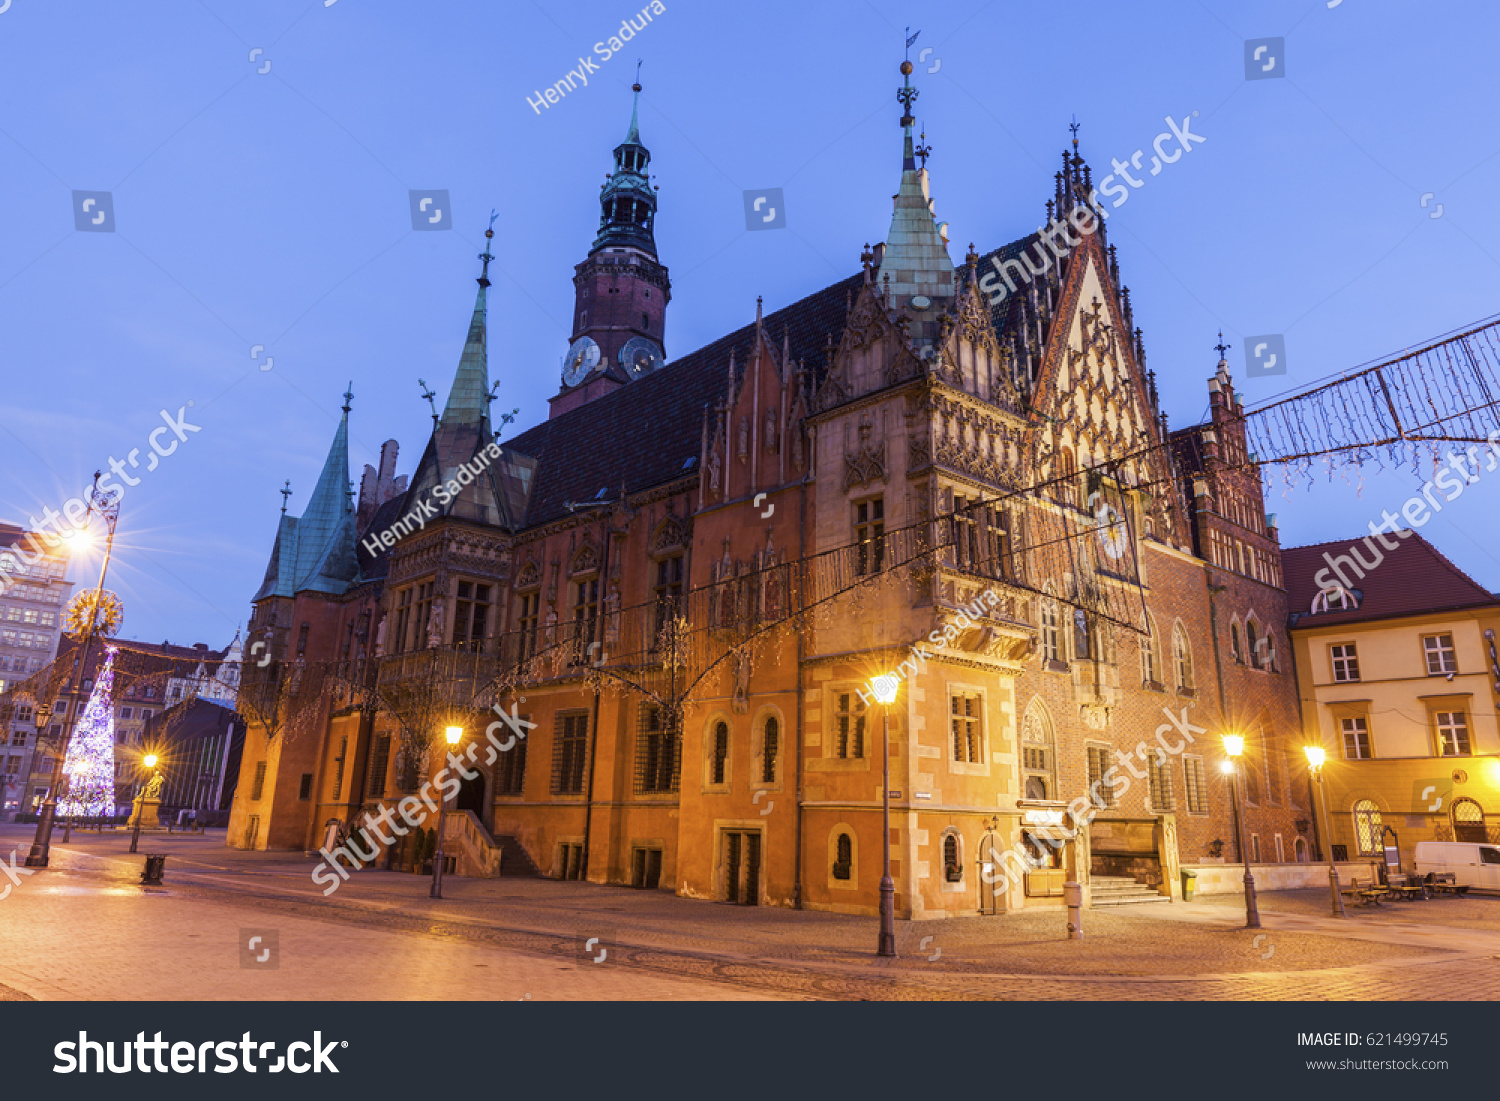 Old City Hall on Market Square in Wroclaw. Wroclaw, Lower Silesian, Poland. #621499745